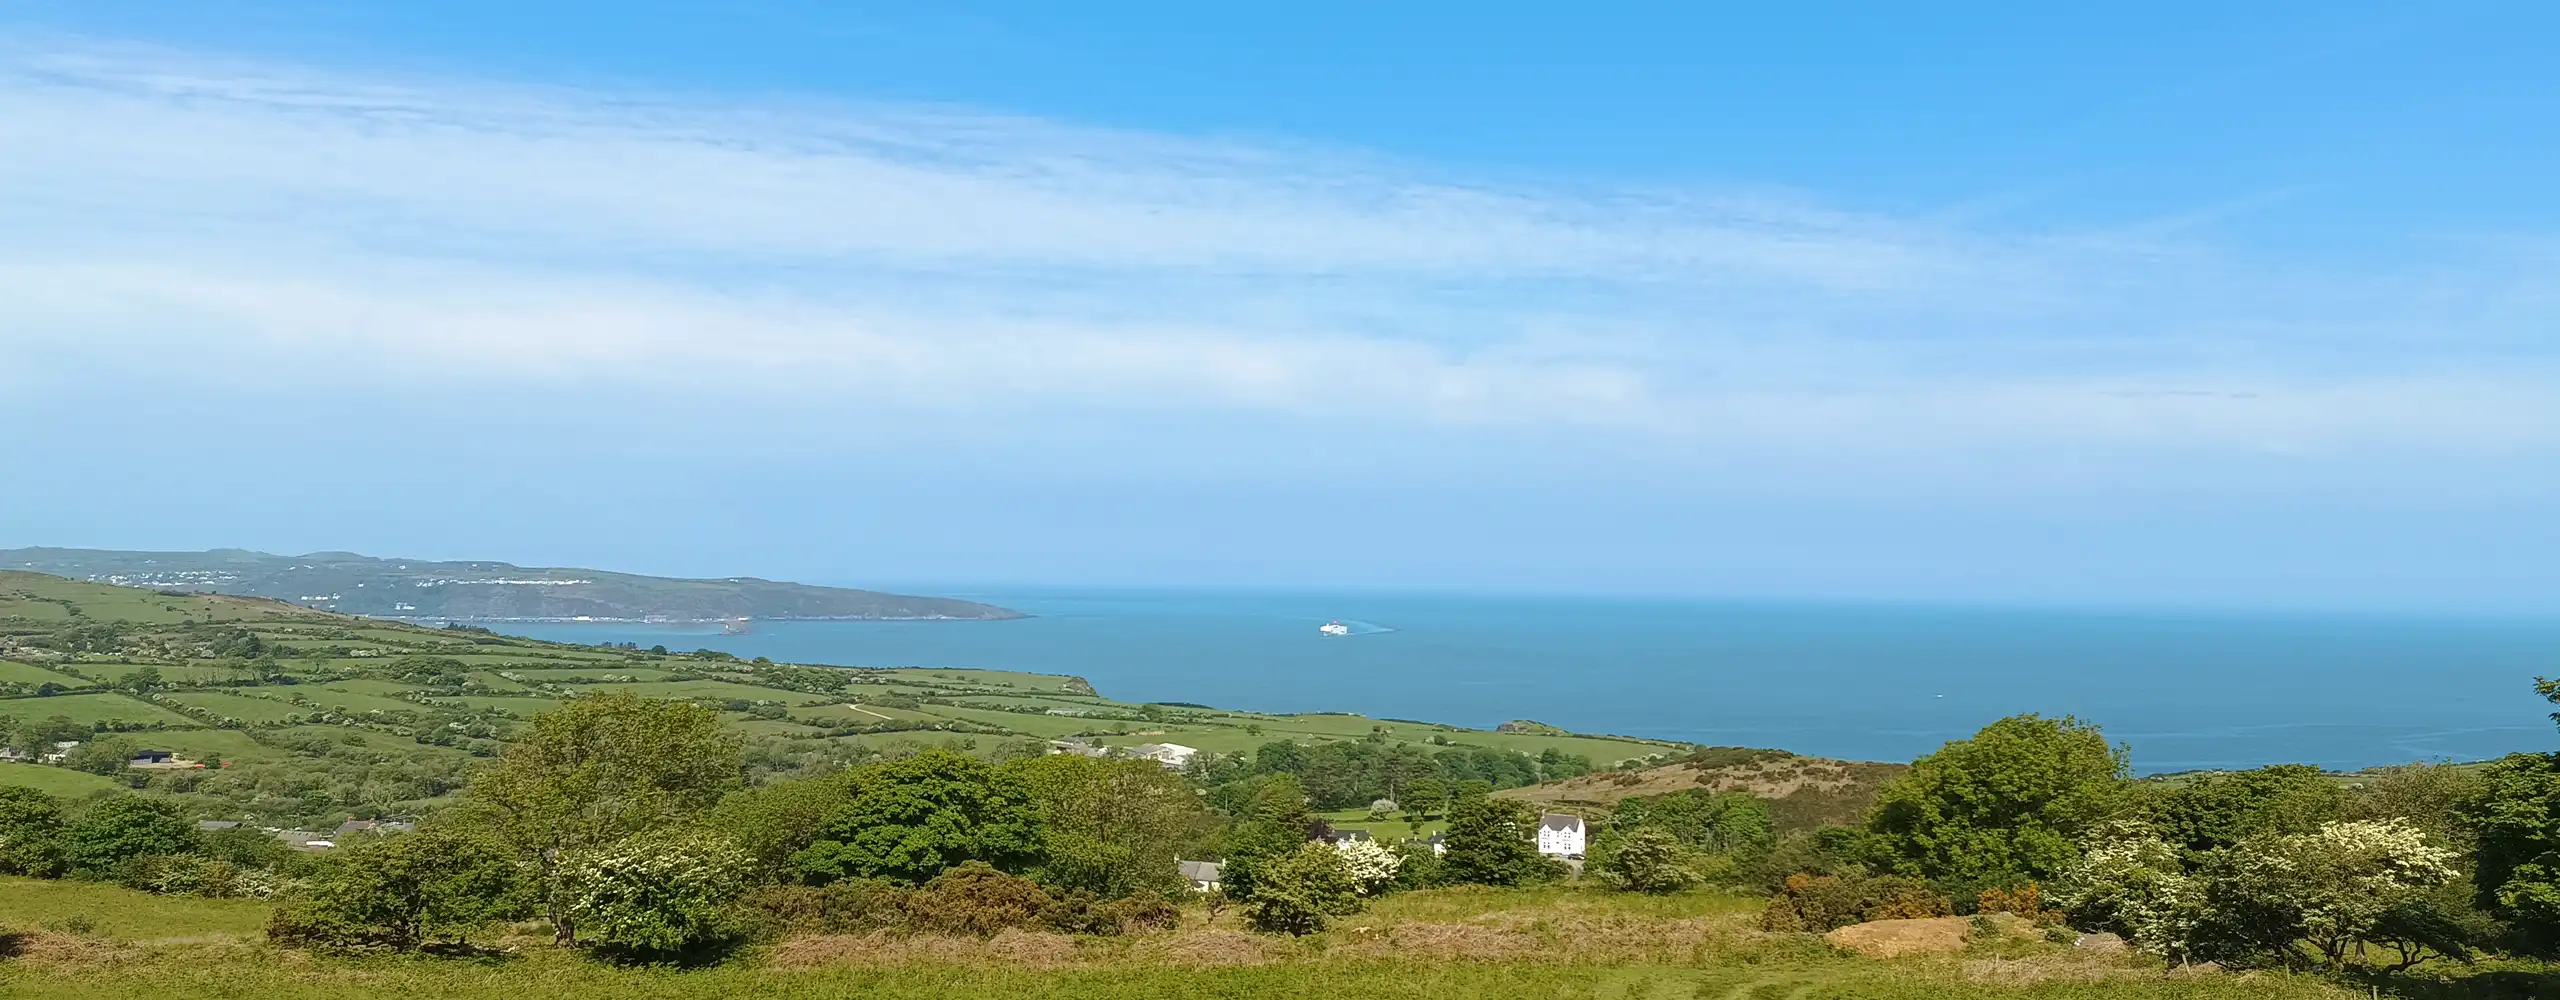 View of Fishguard Bay from Bryn Niwl Holiday Cottage